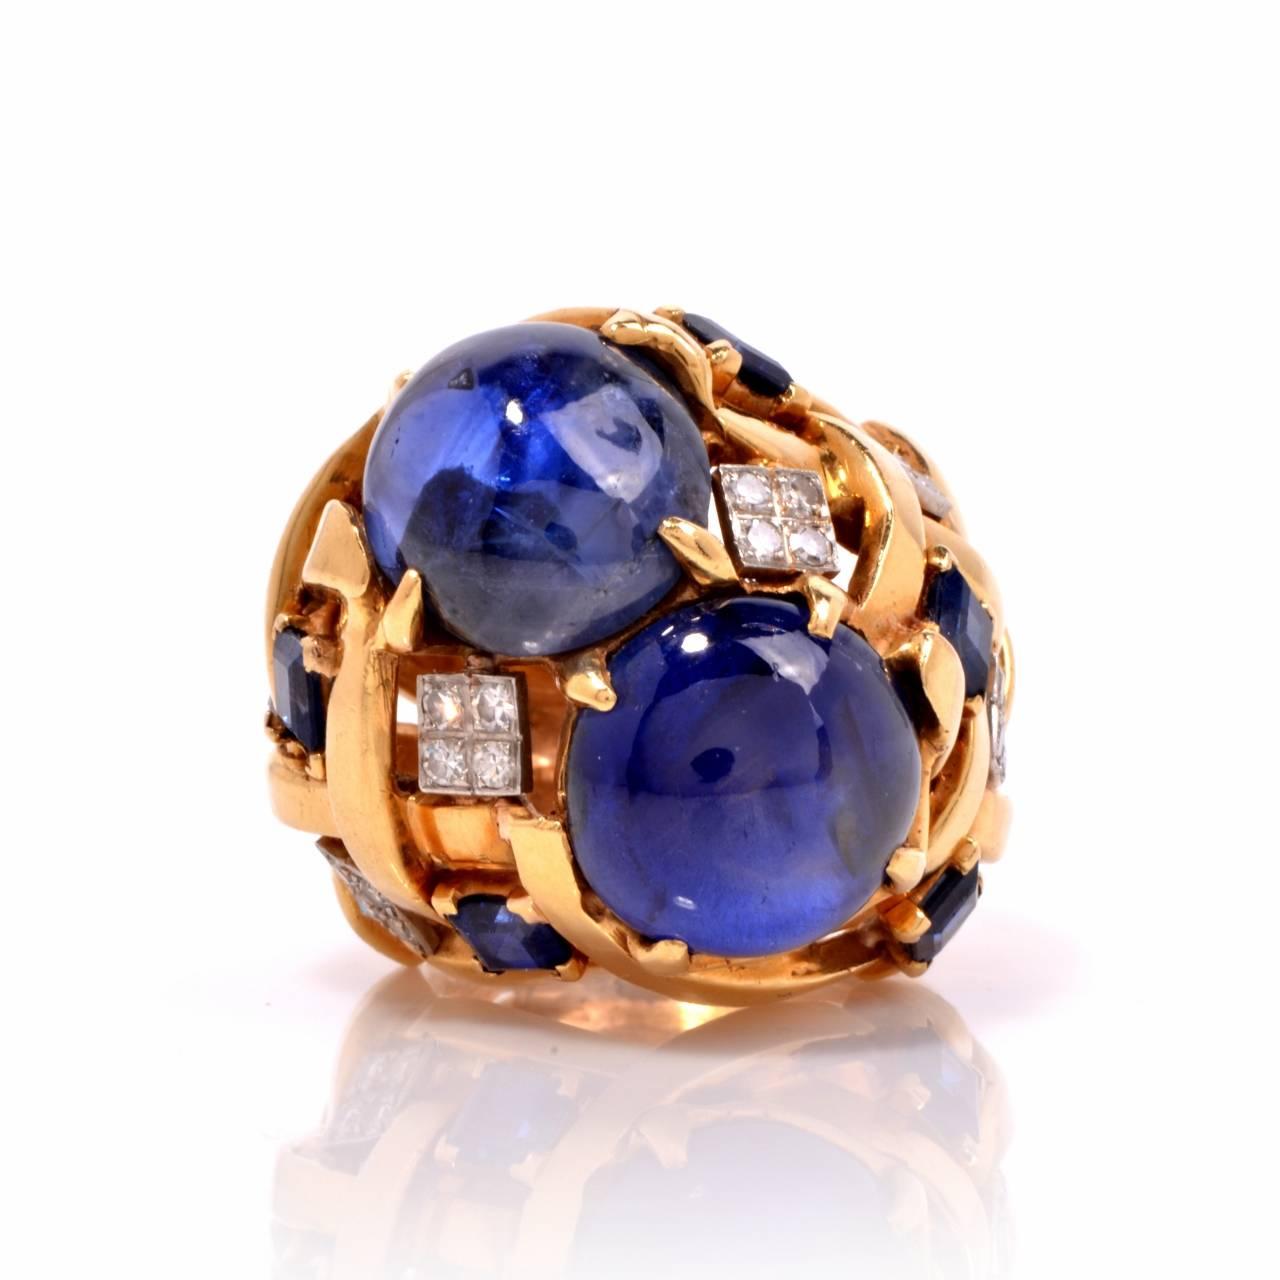 Dover Jewelry presents this glamorous estate cocktail ring, finely crafted in solid 18k yellow gold.

This ring features 2 genuine GIA Graded Report #1162697778 & #2165697786 cabochon Natural Blue Sapphires Cabochon (Sri Lanka origin), 1 weighing